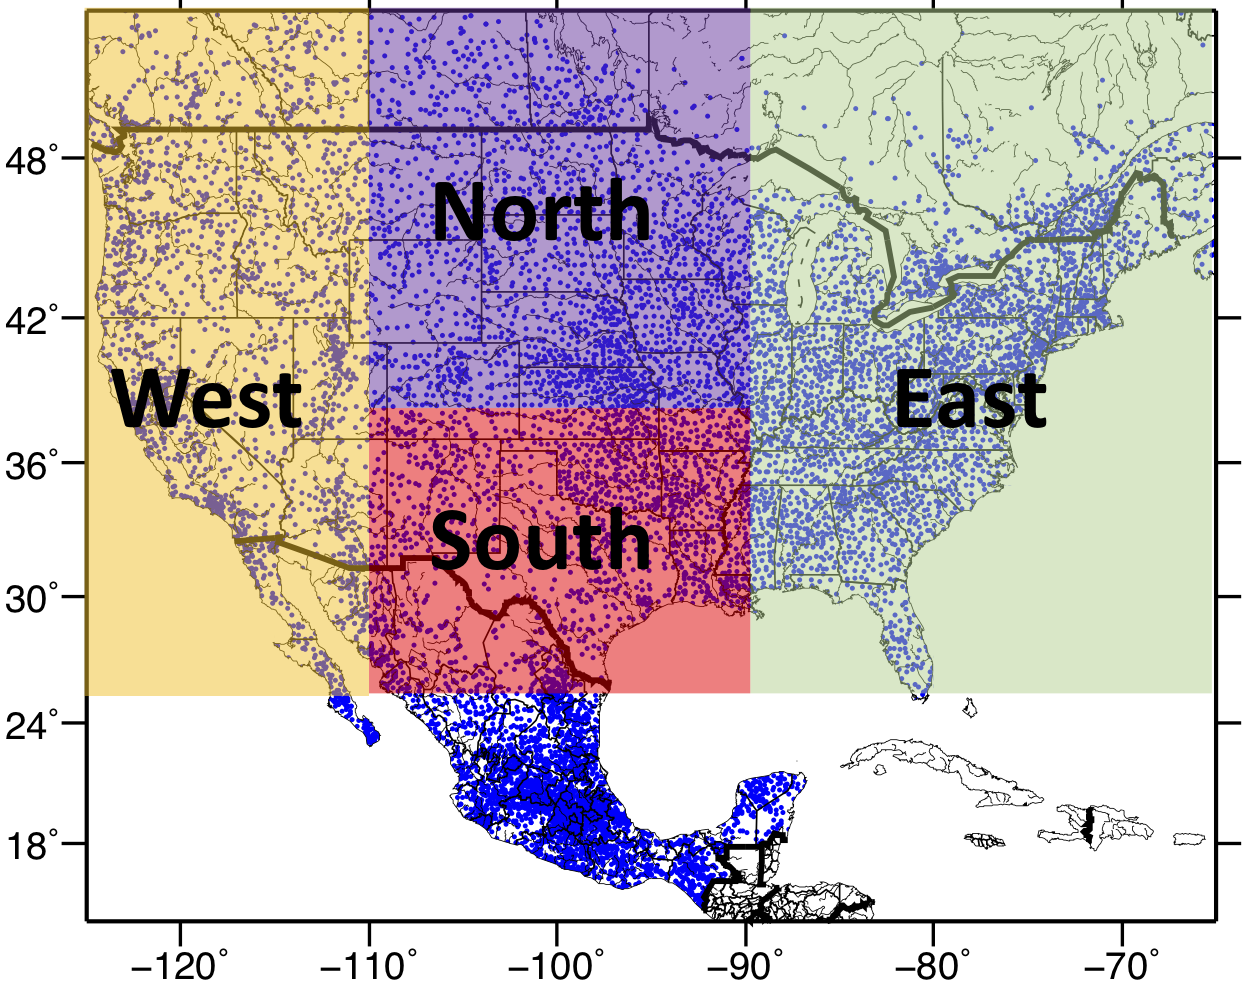 Livneh gridded precipitation and other meteorological variables for continental US, Mexico and southern Canada